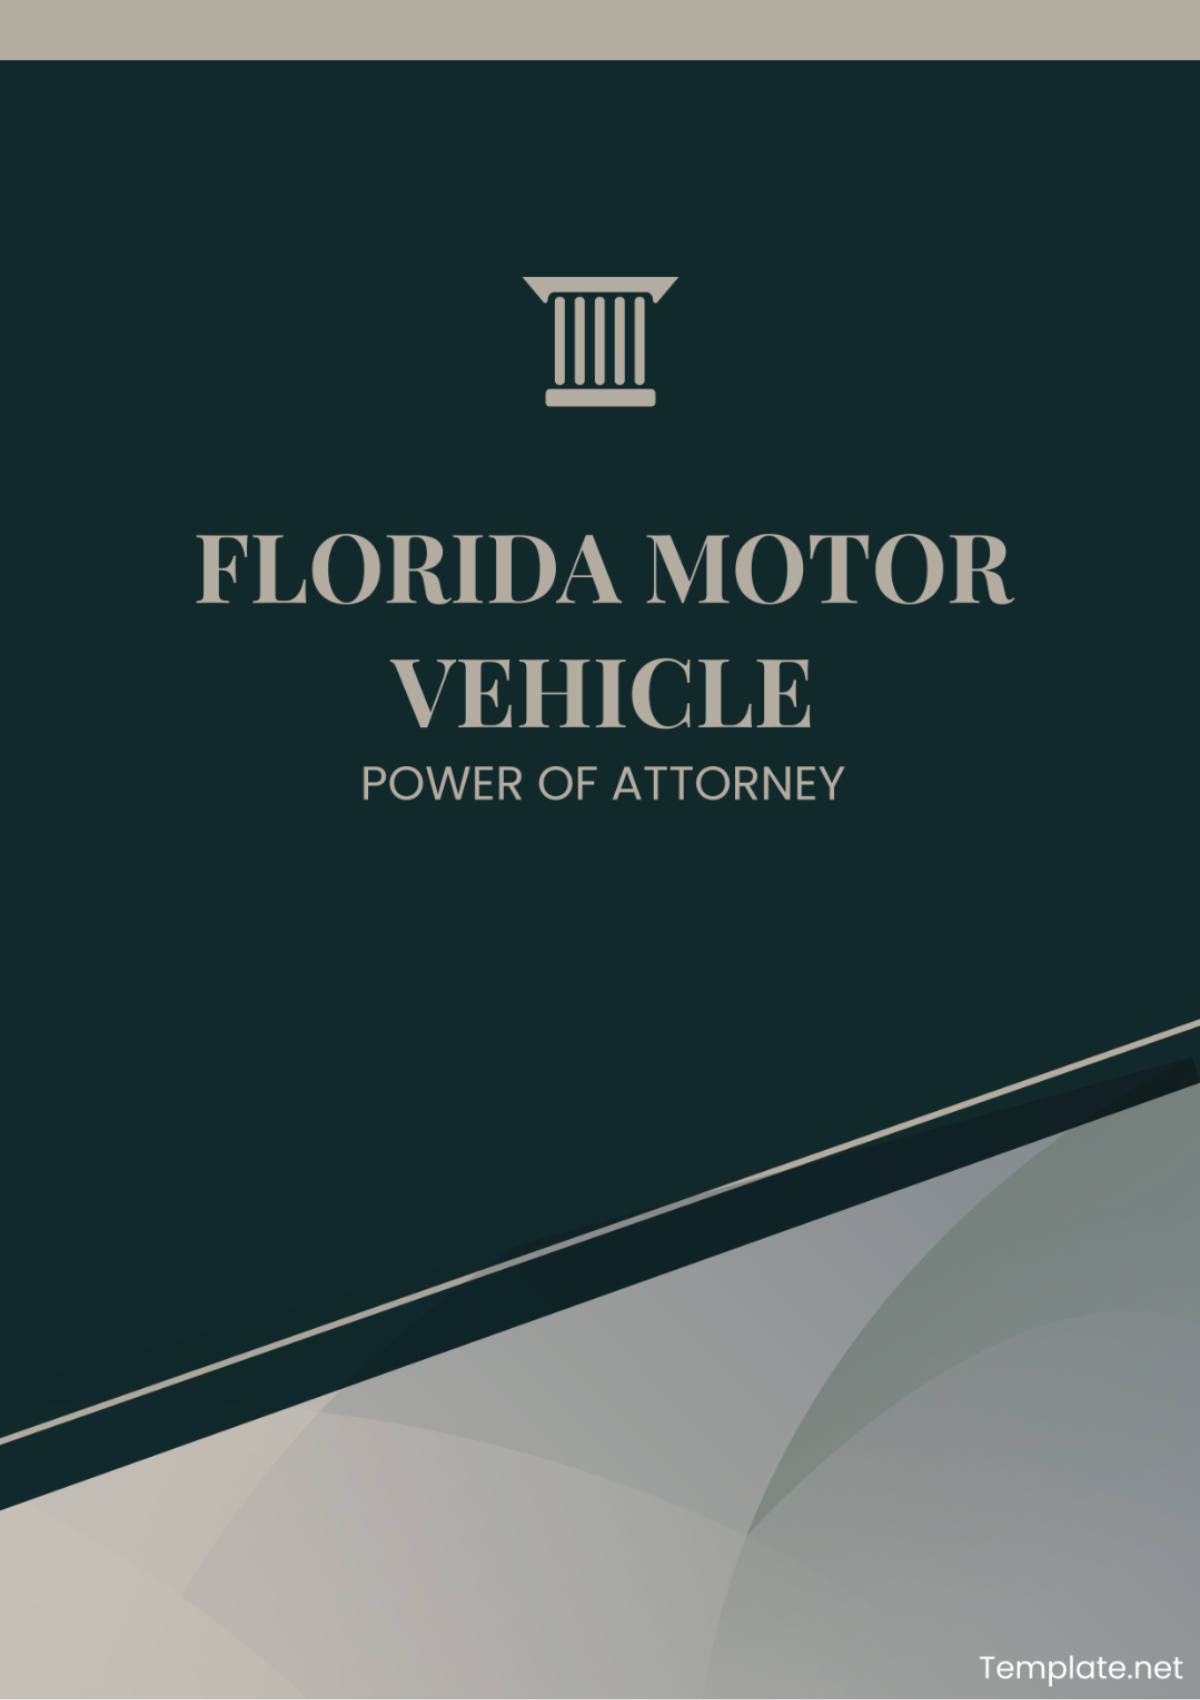 Florida Motor Vehicle Power of Attorney Template